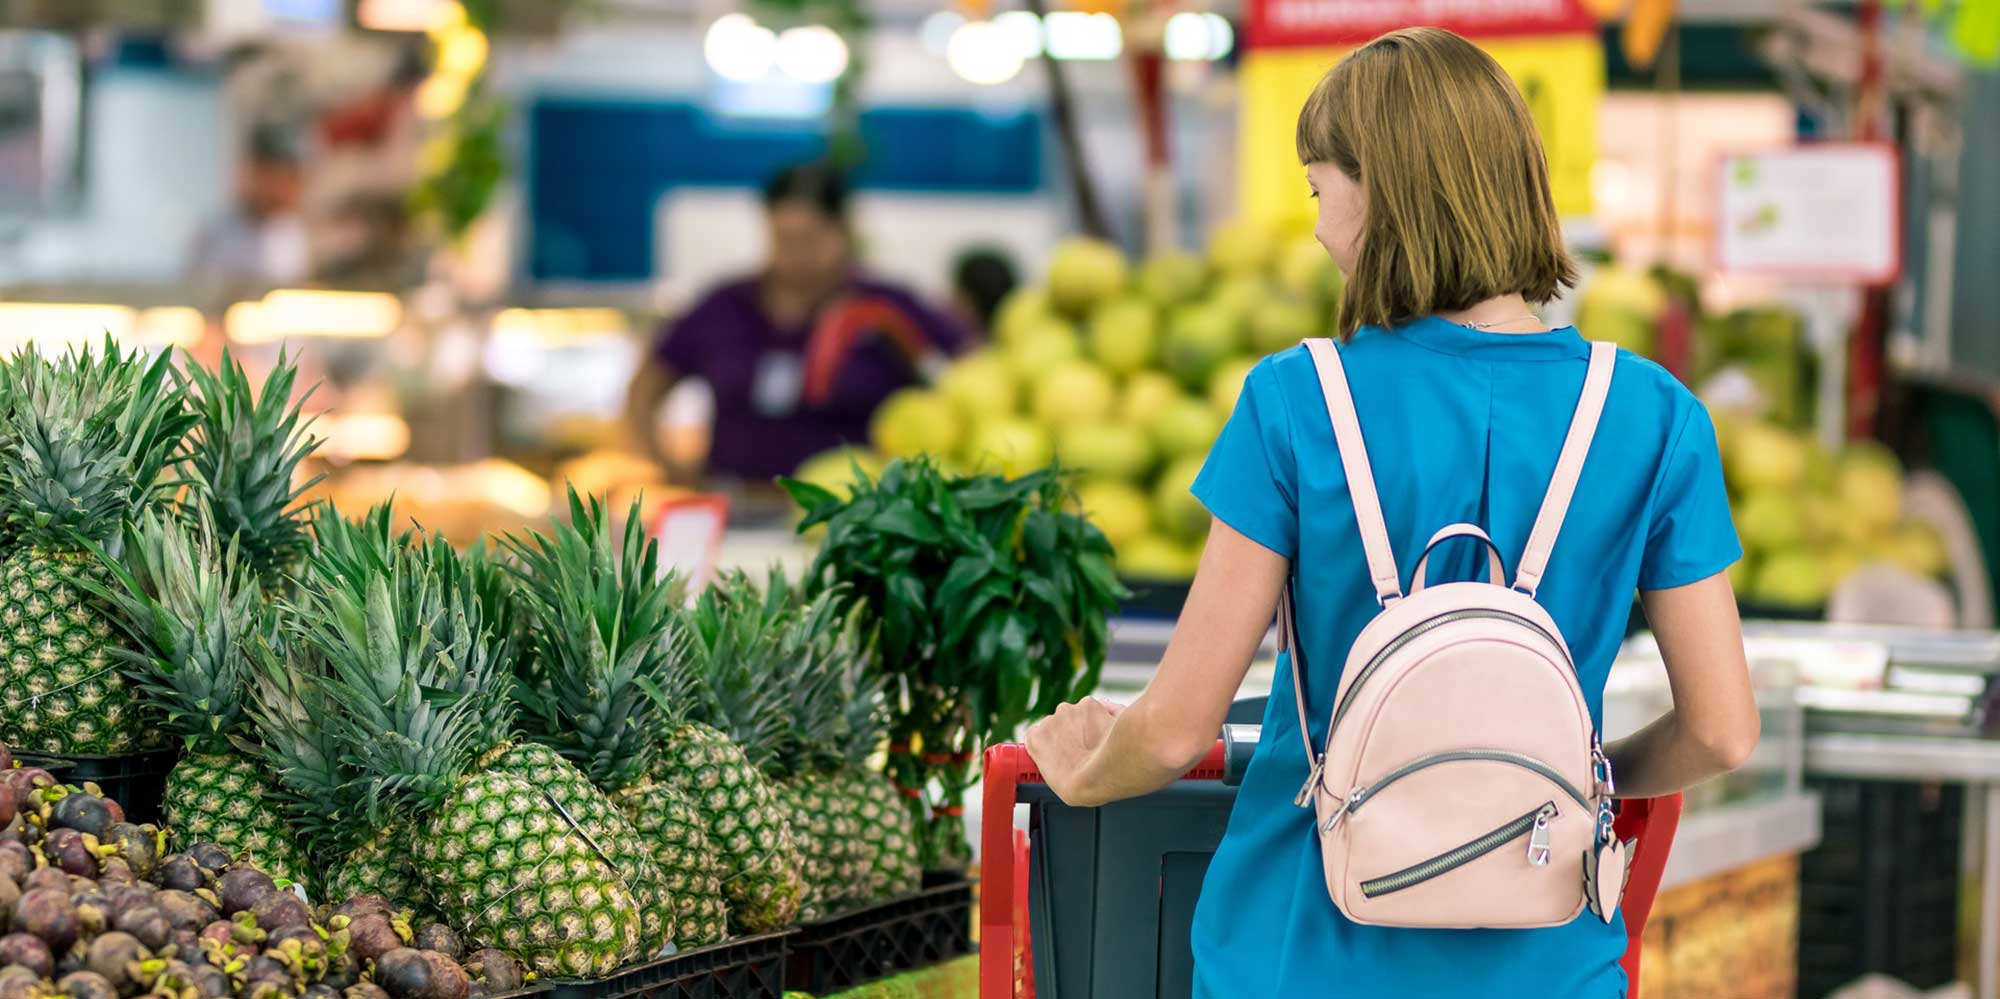 Woman in a blue t-shit and pick backpack pushes her cart around a grocery store next to pineapples.